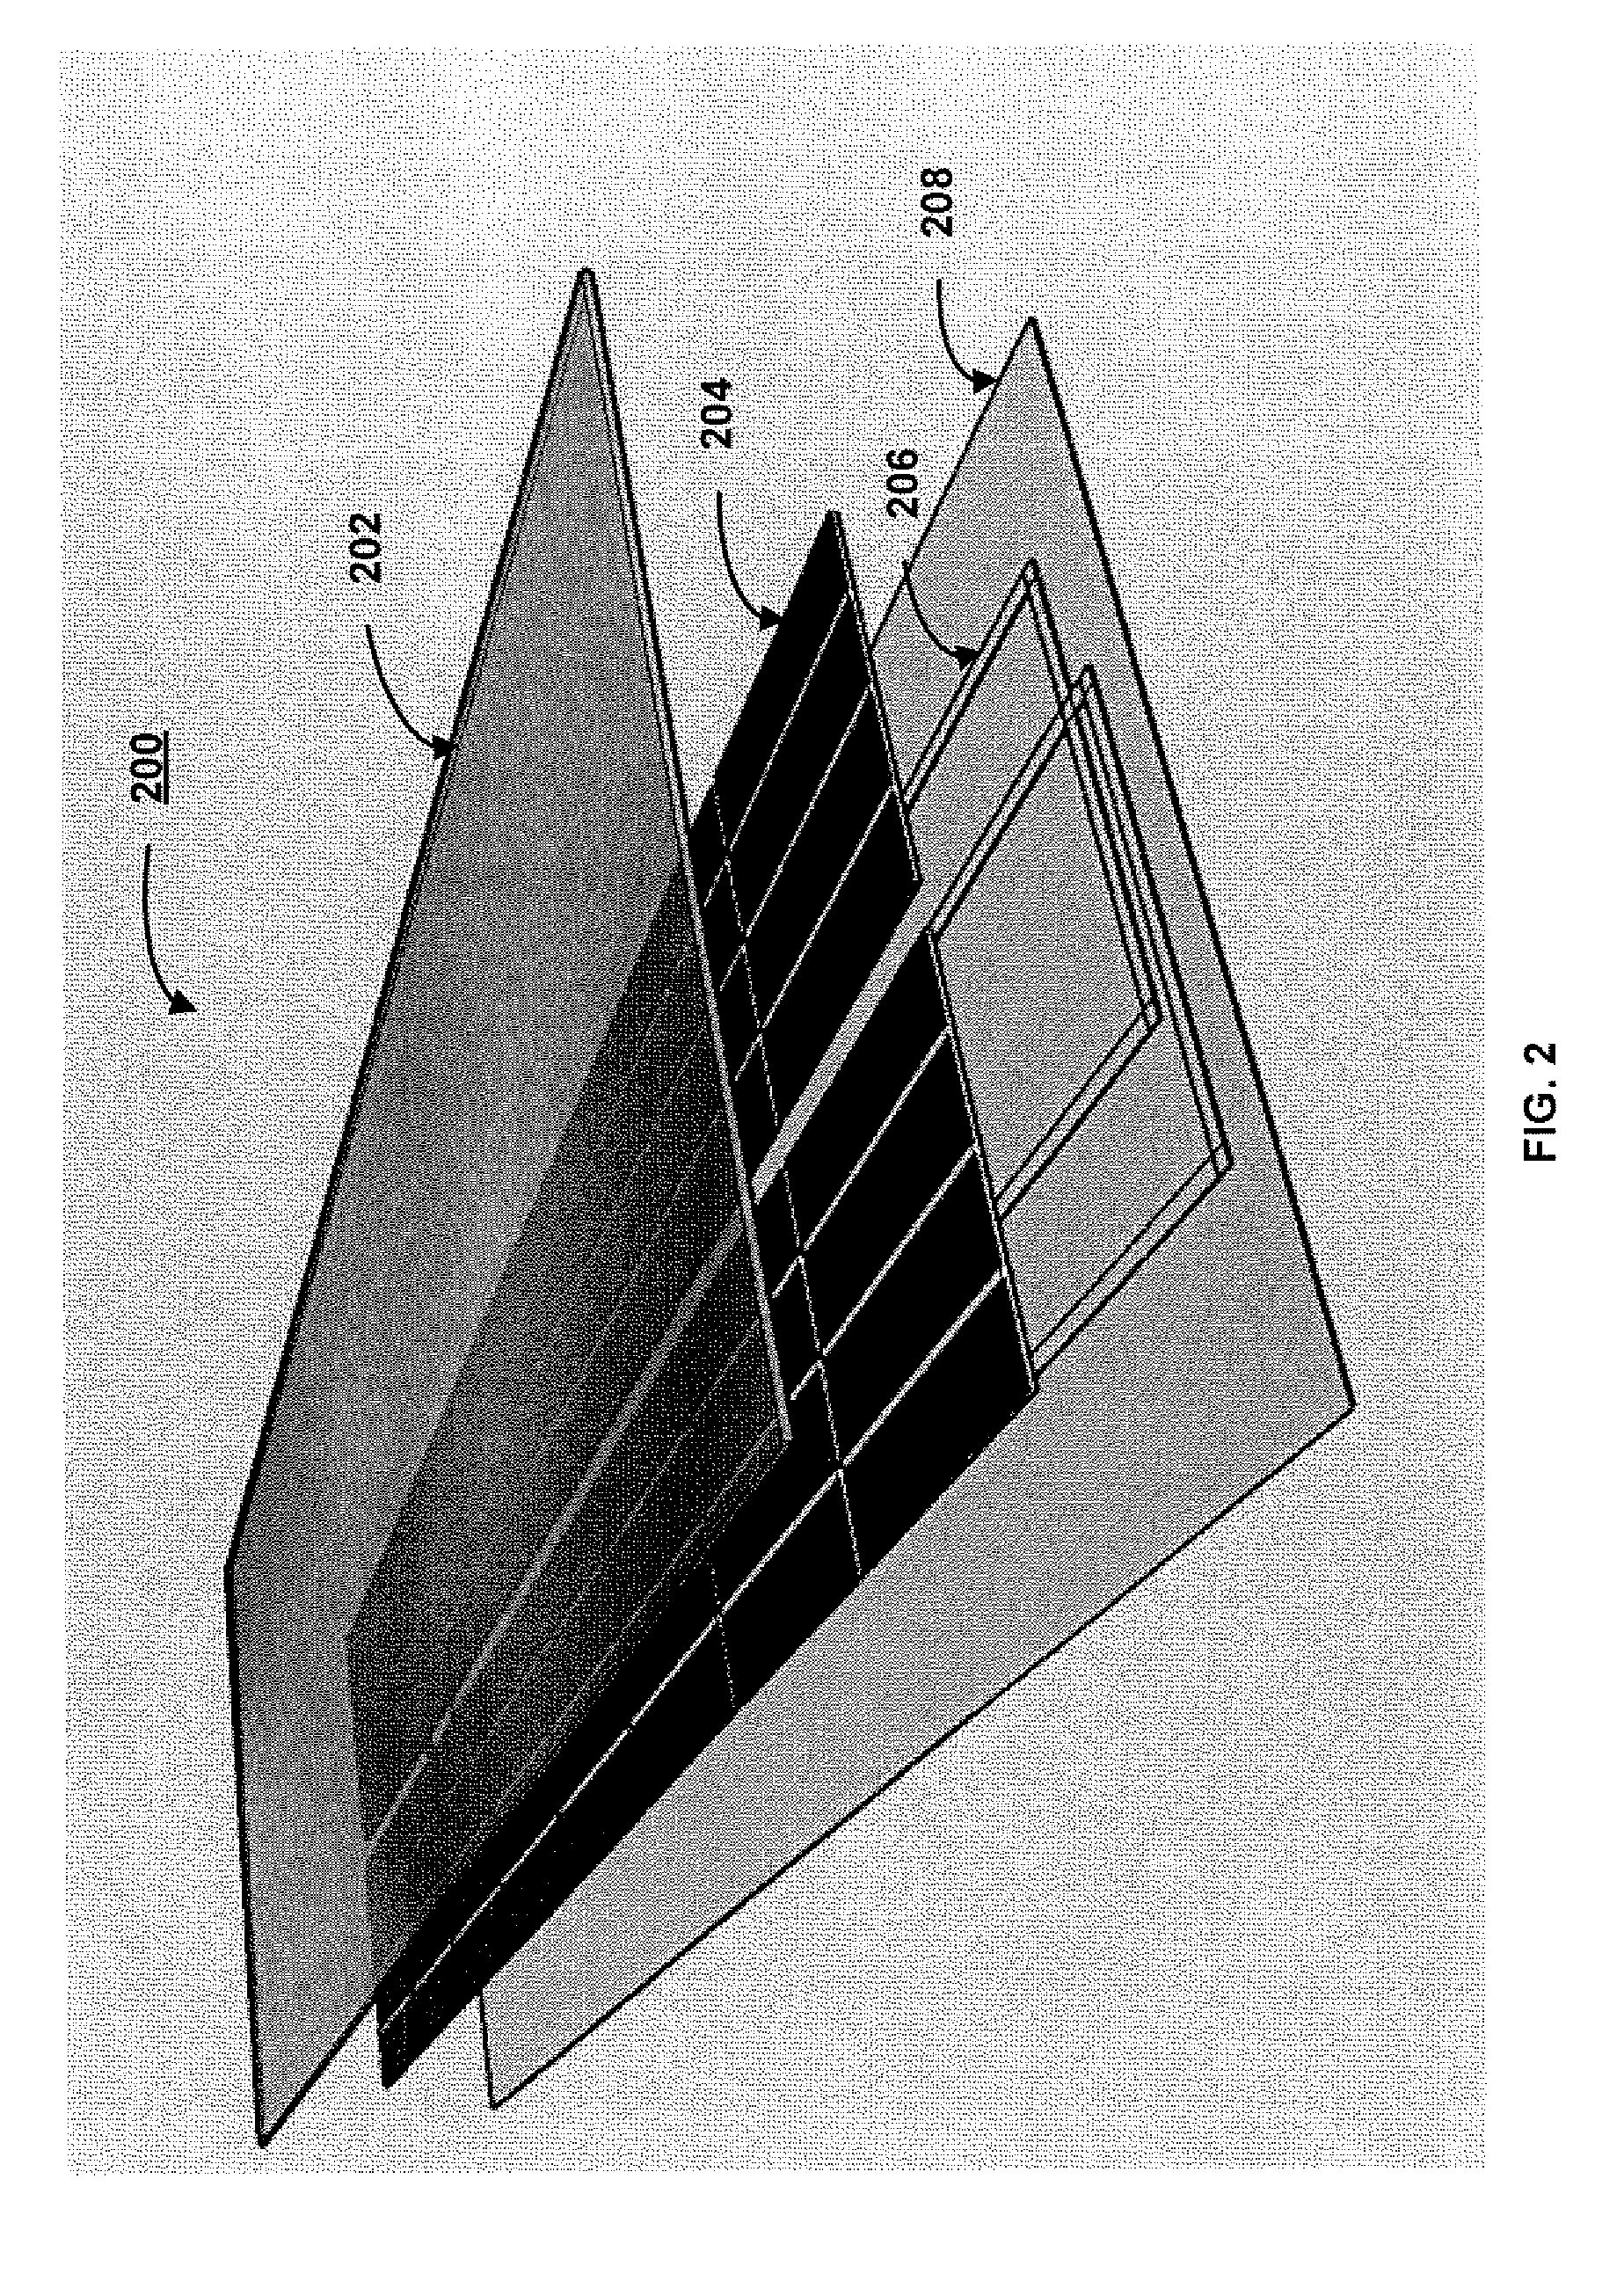 Solar panels systems and methods